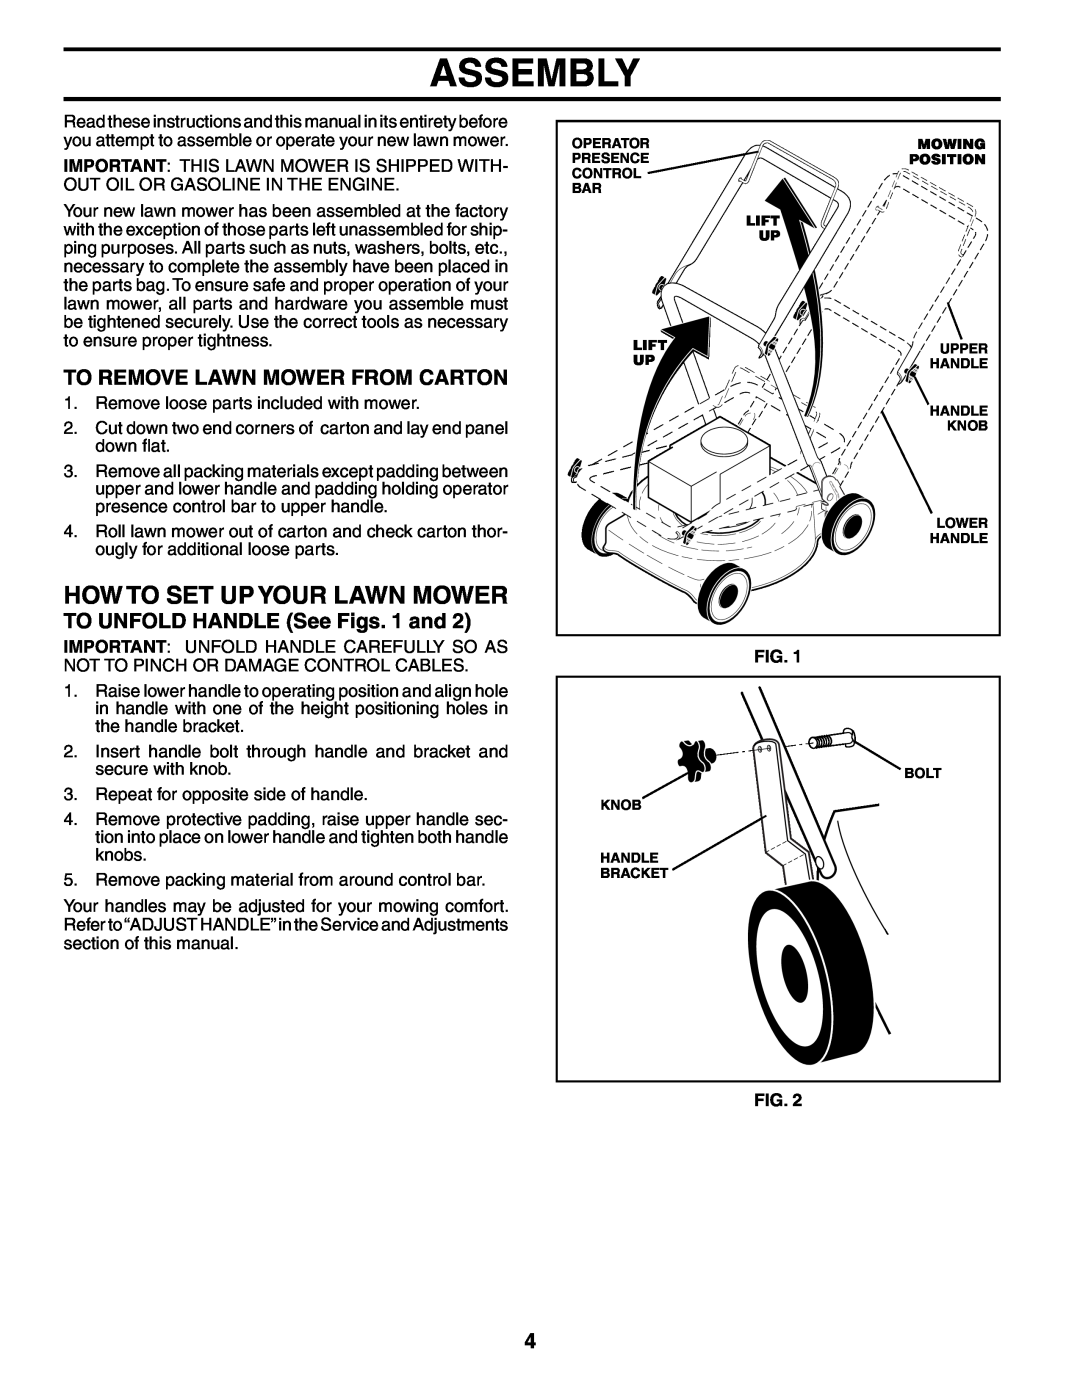 Husqvarna 67521HVE owner manual Assembly, How To Set Up Your Lawn Mower, To Remove Lawn Mower From Carton 